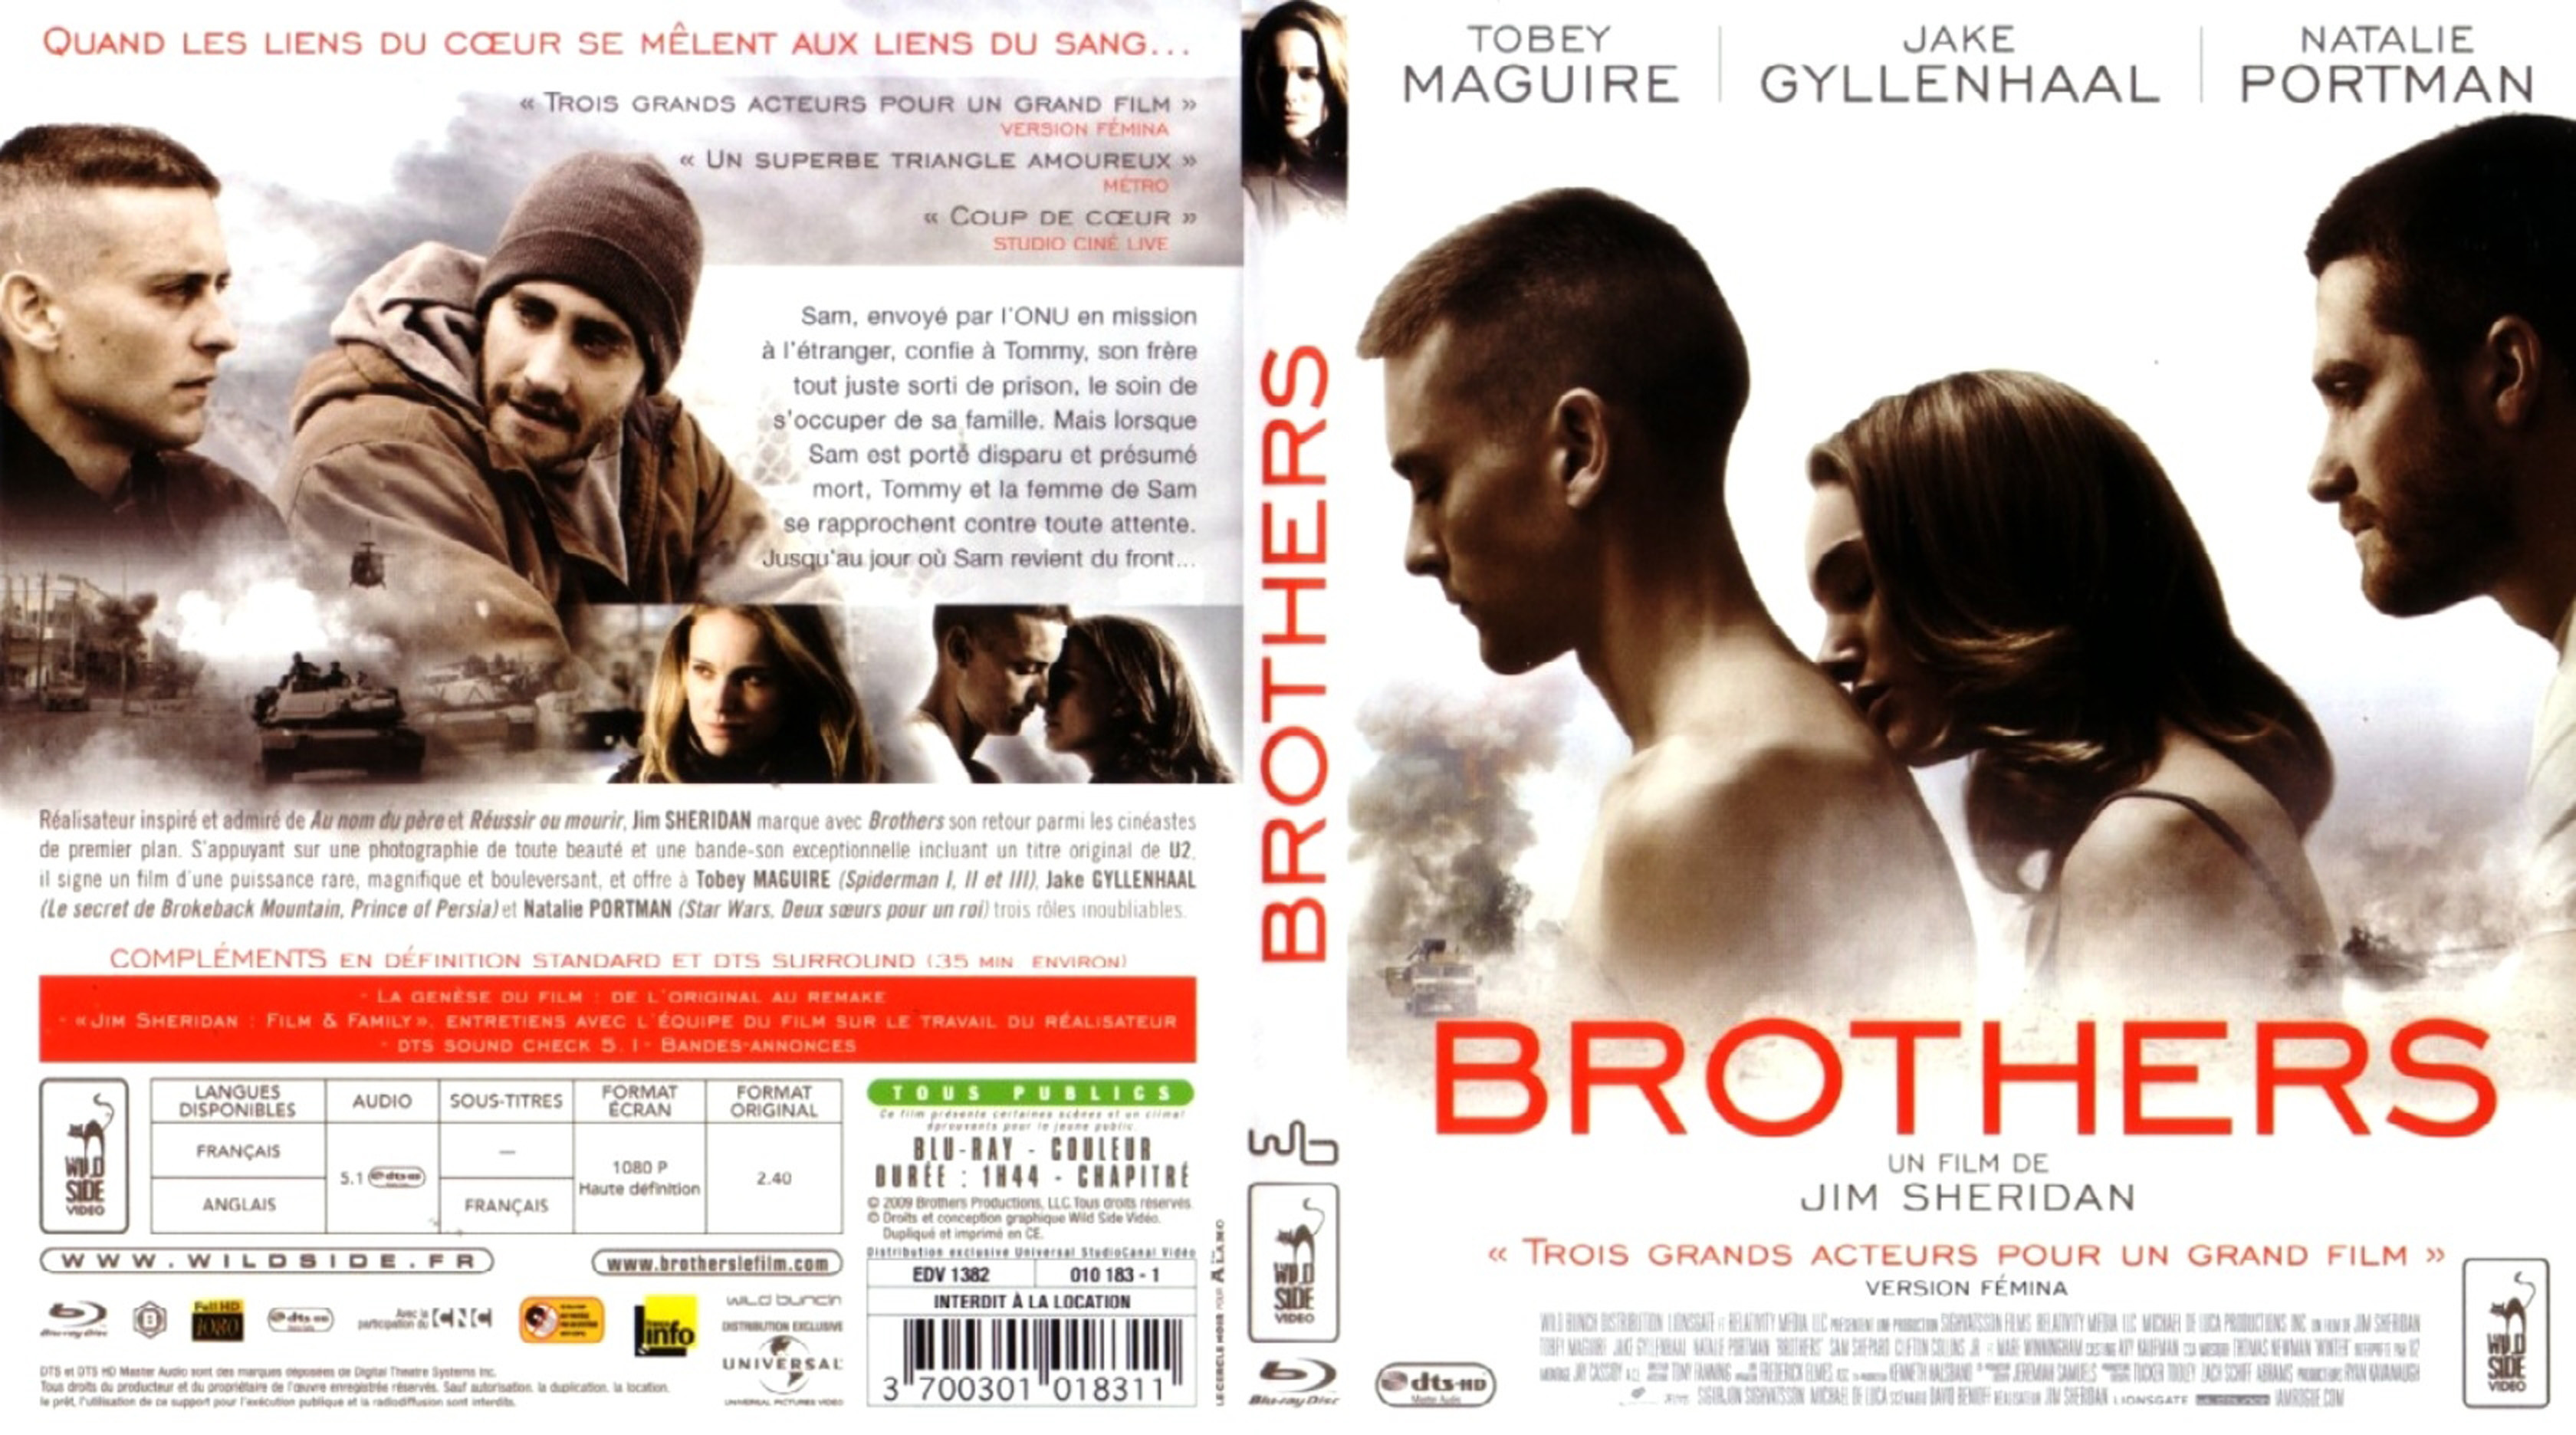 Jaquette DVD Brothers (BLU-RAY)